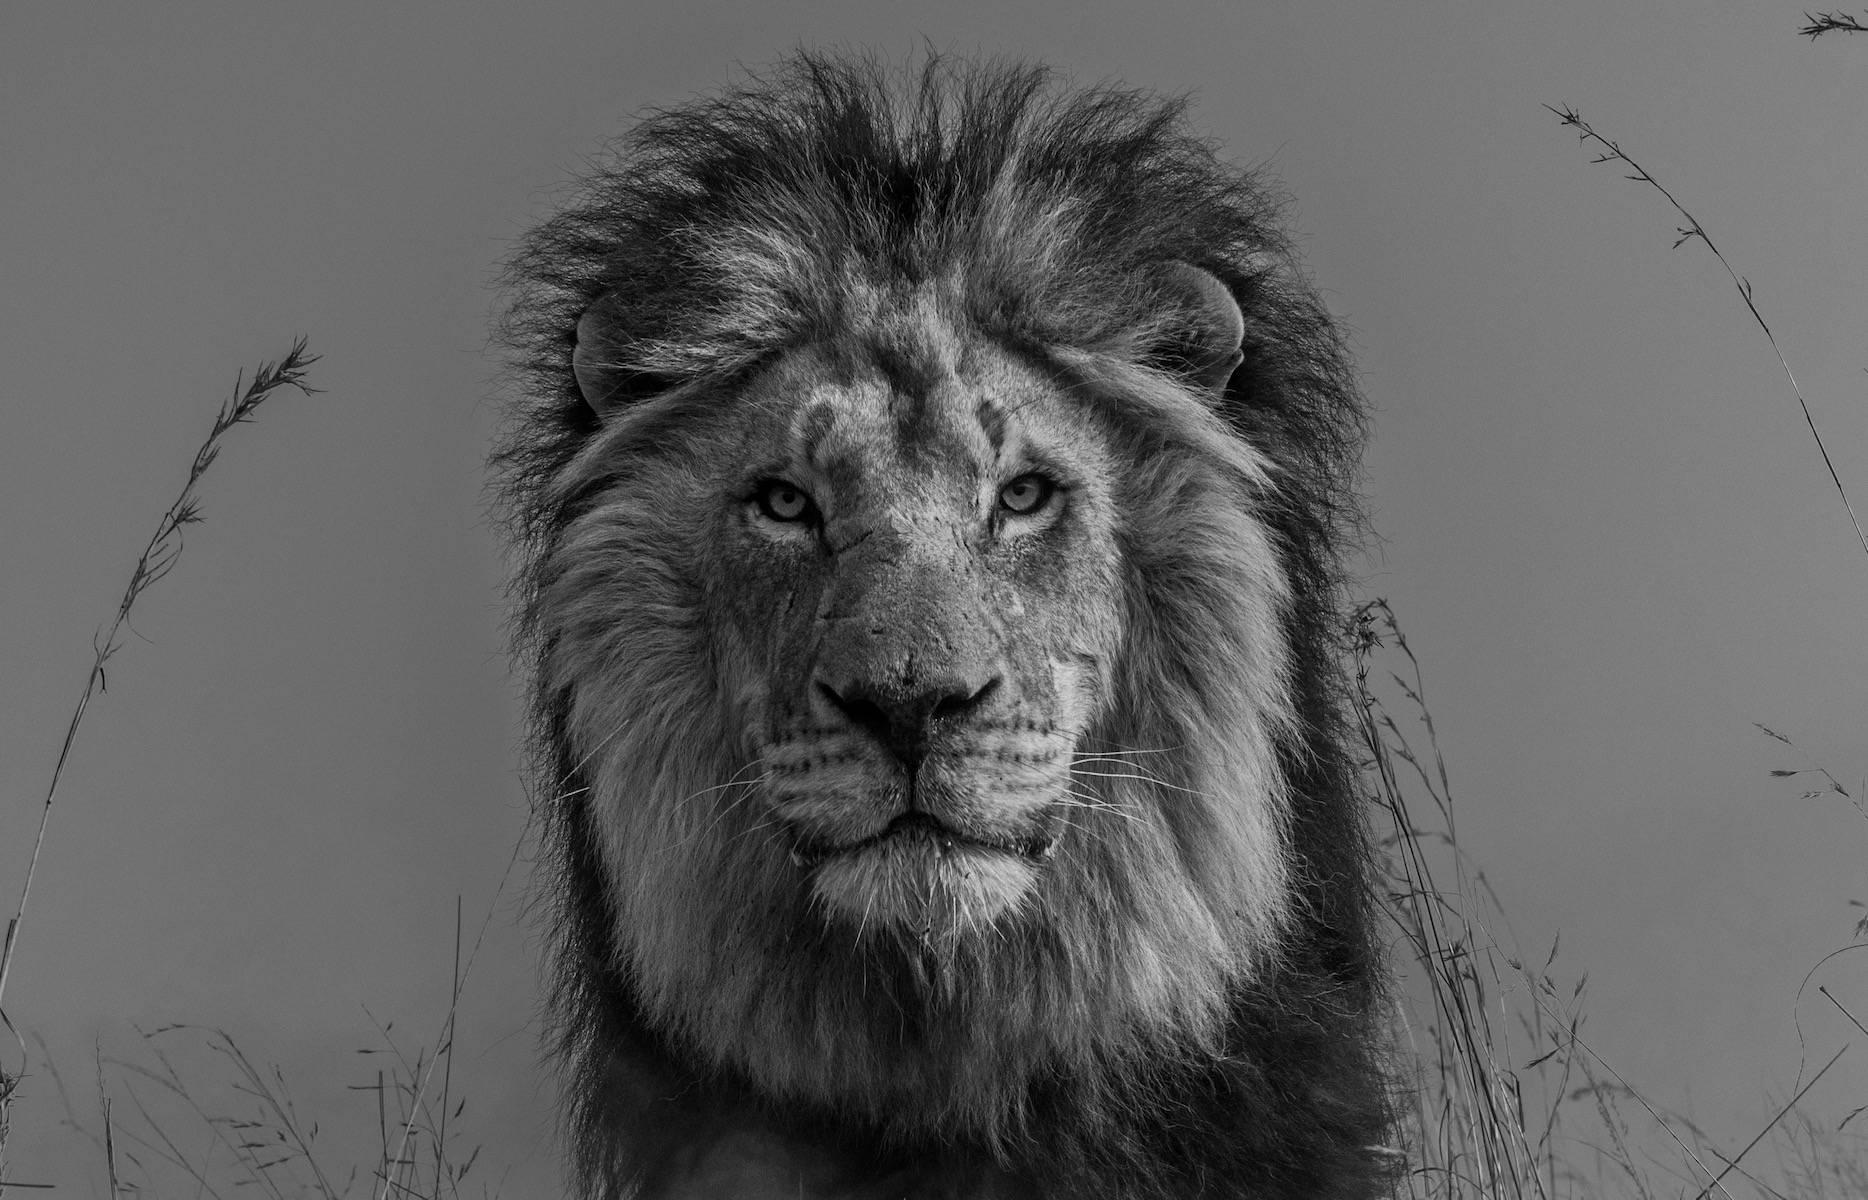 The King and I - Photograph by David Yarrow